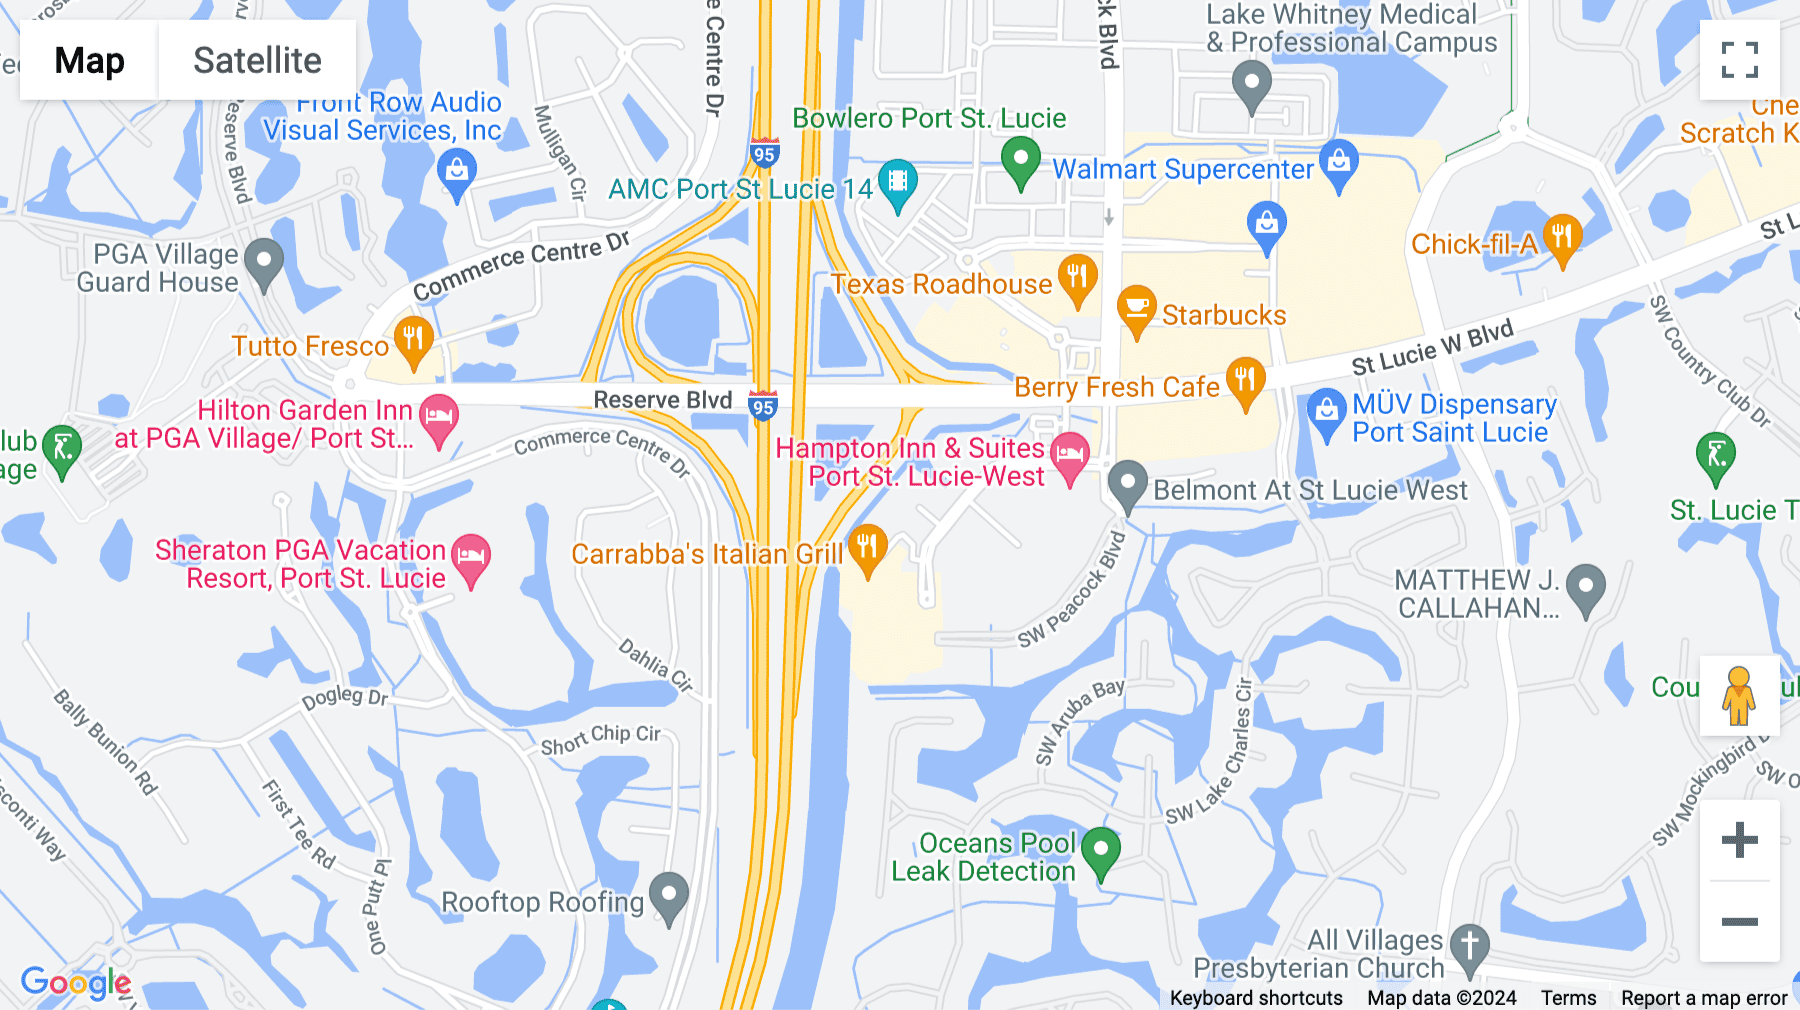 Click for interative map of 1860 Southwest Fountainview Boulevard, Westview Plaza II, Port St. Lucie